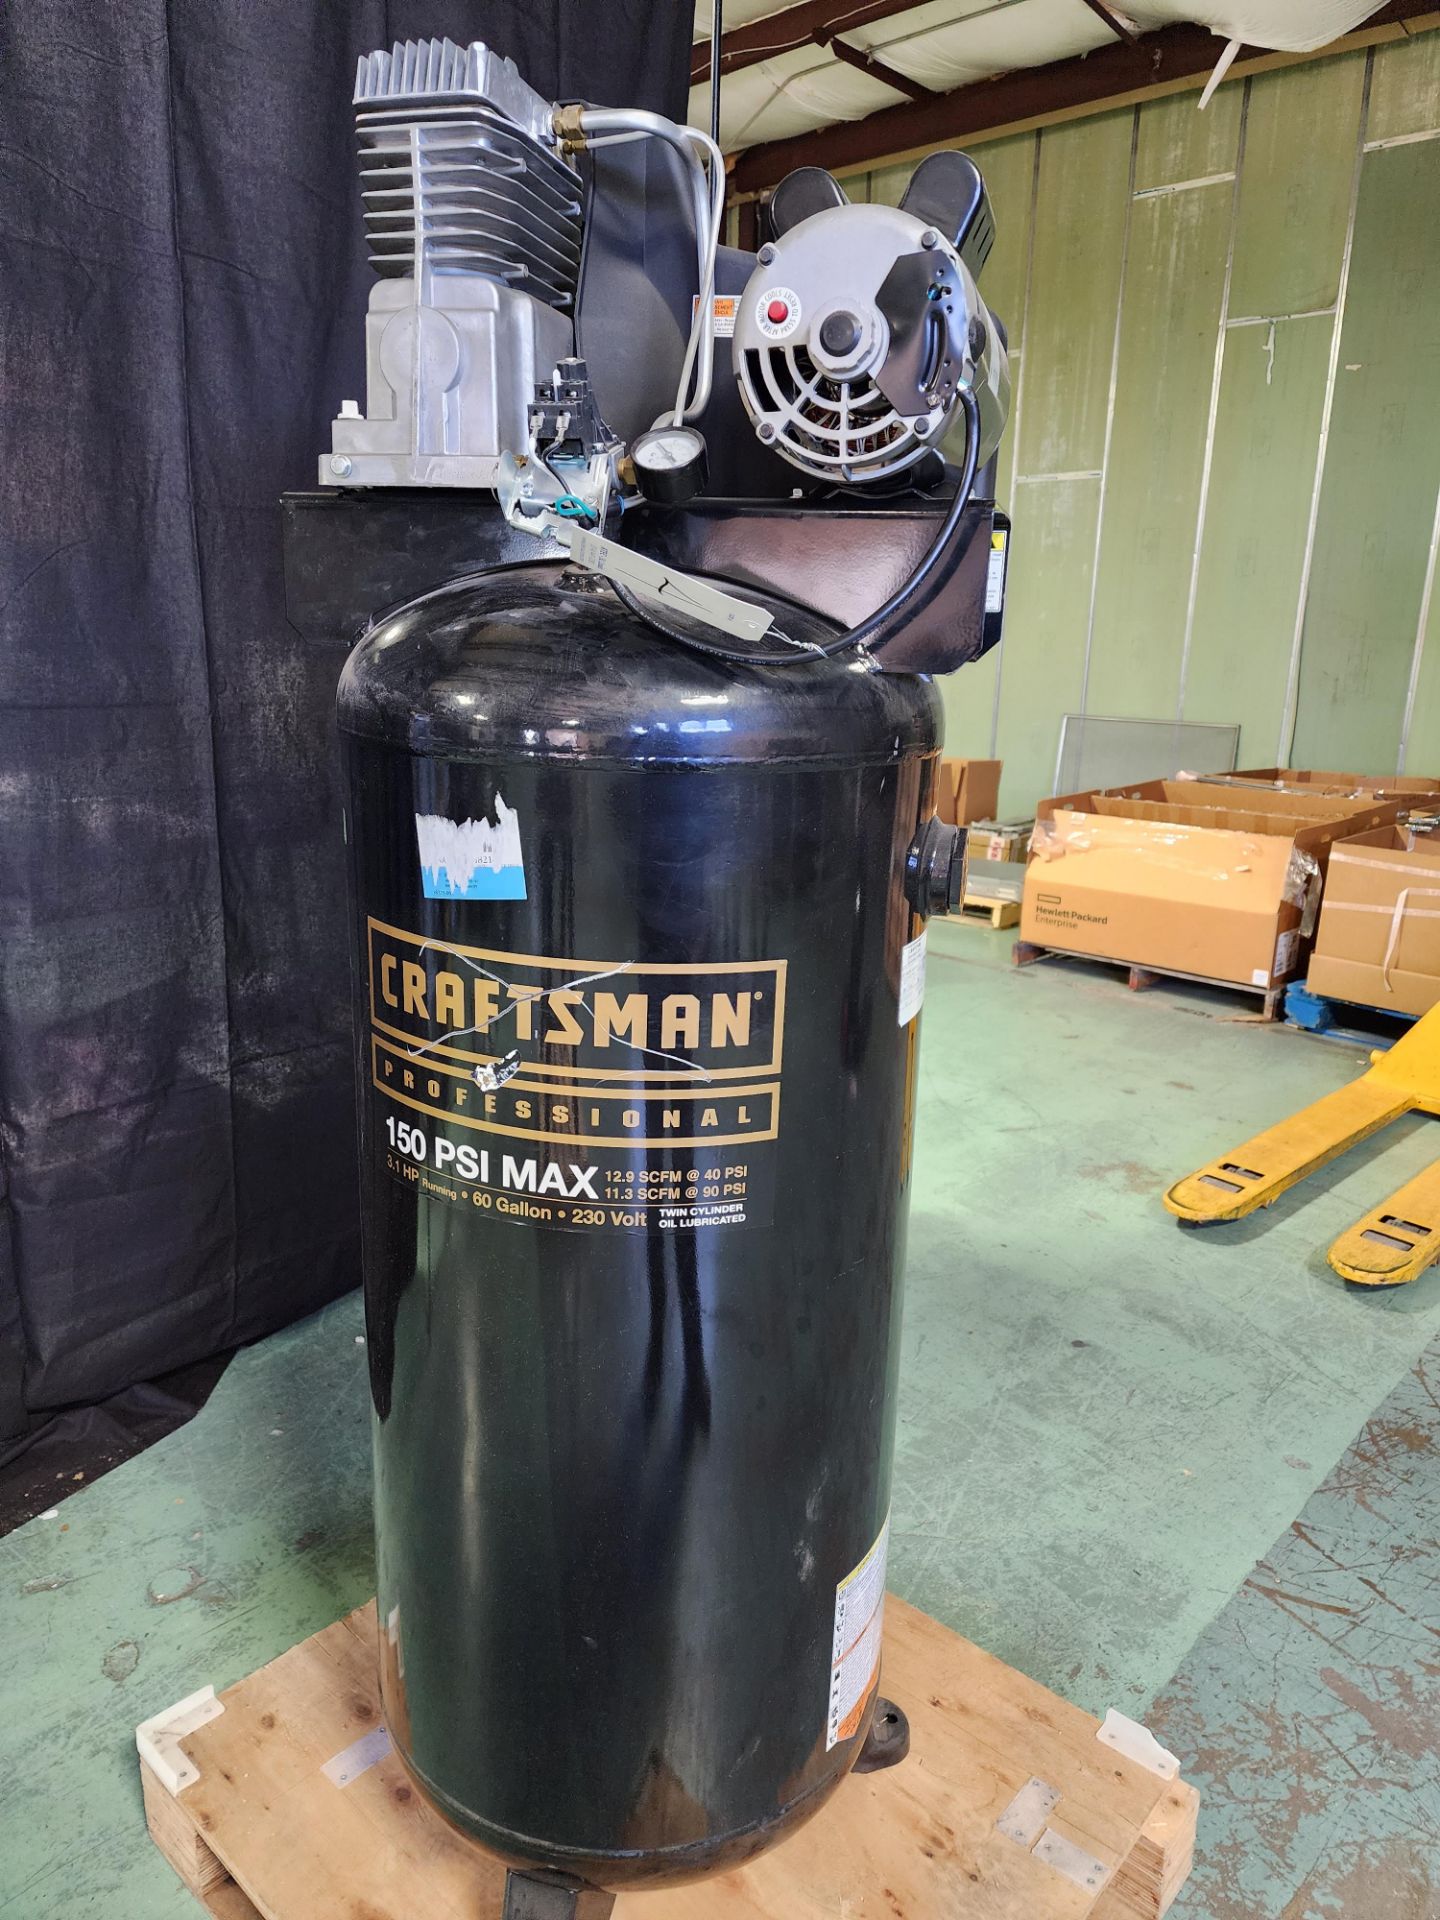 Craftsman Professional Air Compressor - LISTED AS "SALVAGE": 150 PSI, 240 Volt, 3.1 HP, 60 Gallon - Image 2 of 11